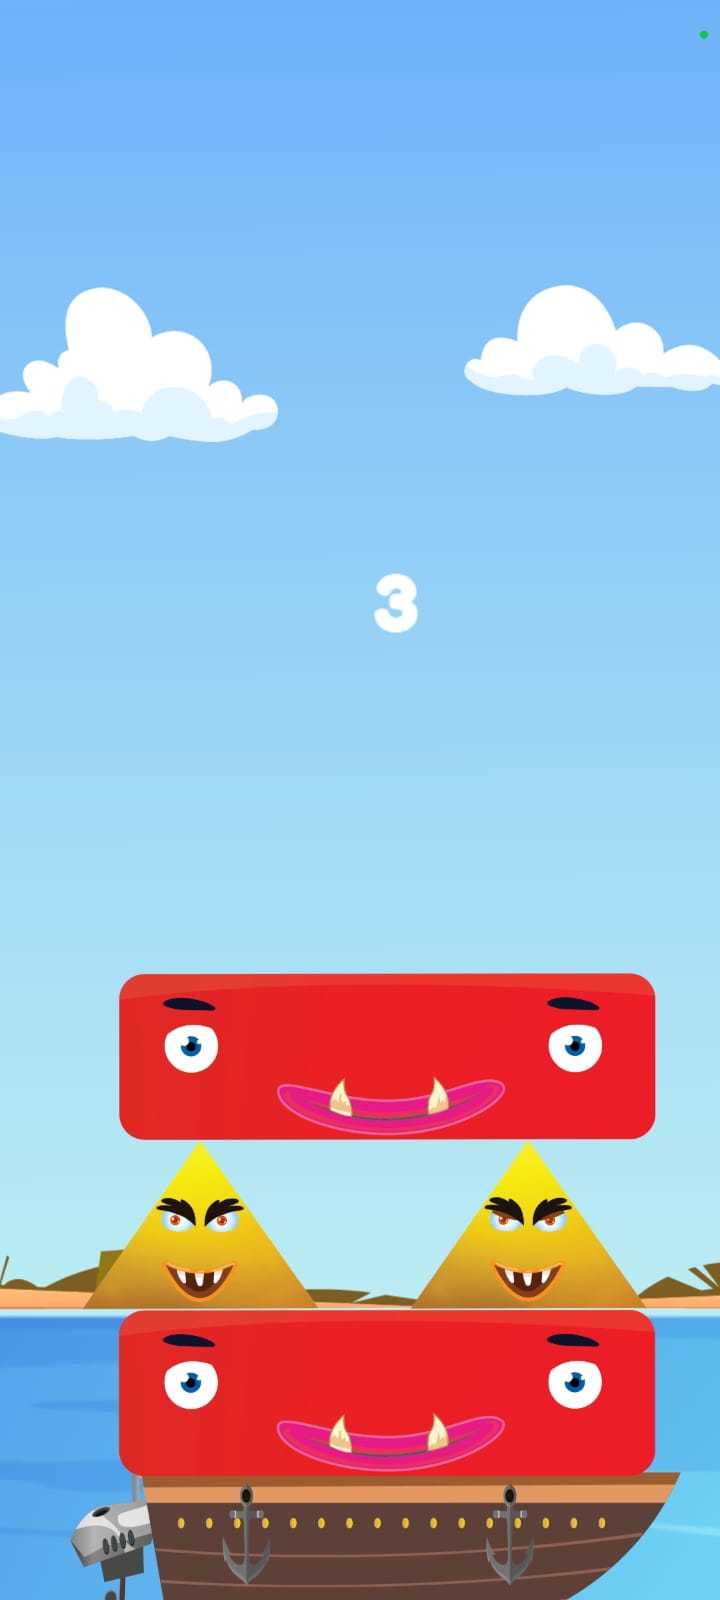 Screenshot 1 of Jelly Blocks : Puzzle Game 1.0